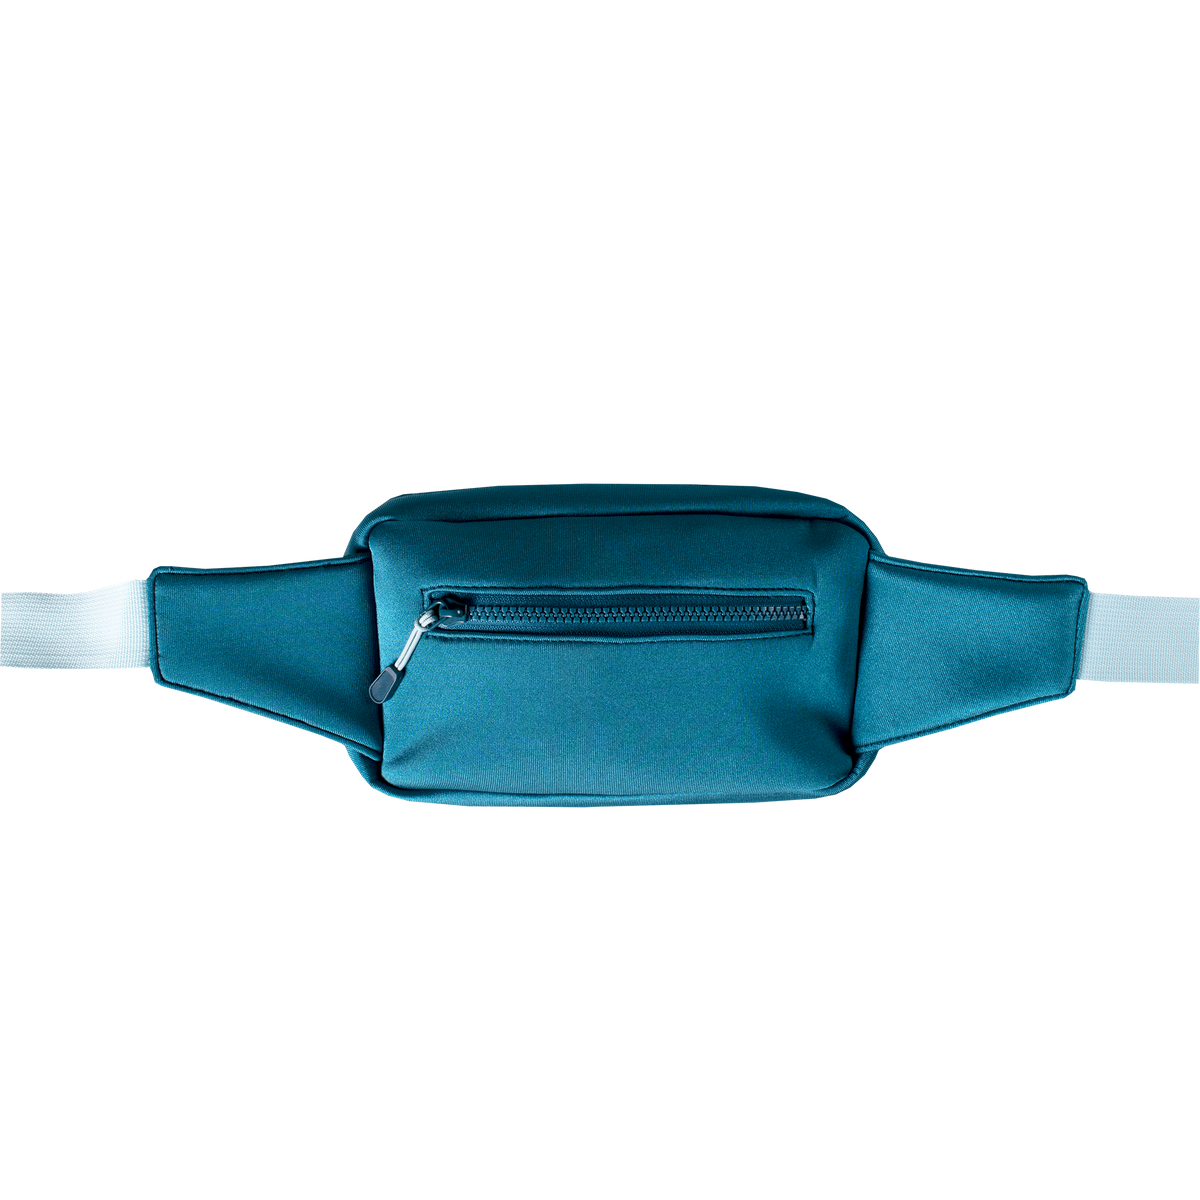 back view of blue hydrow fanny pack showing rear zipper